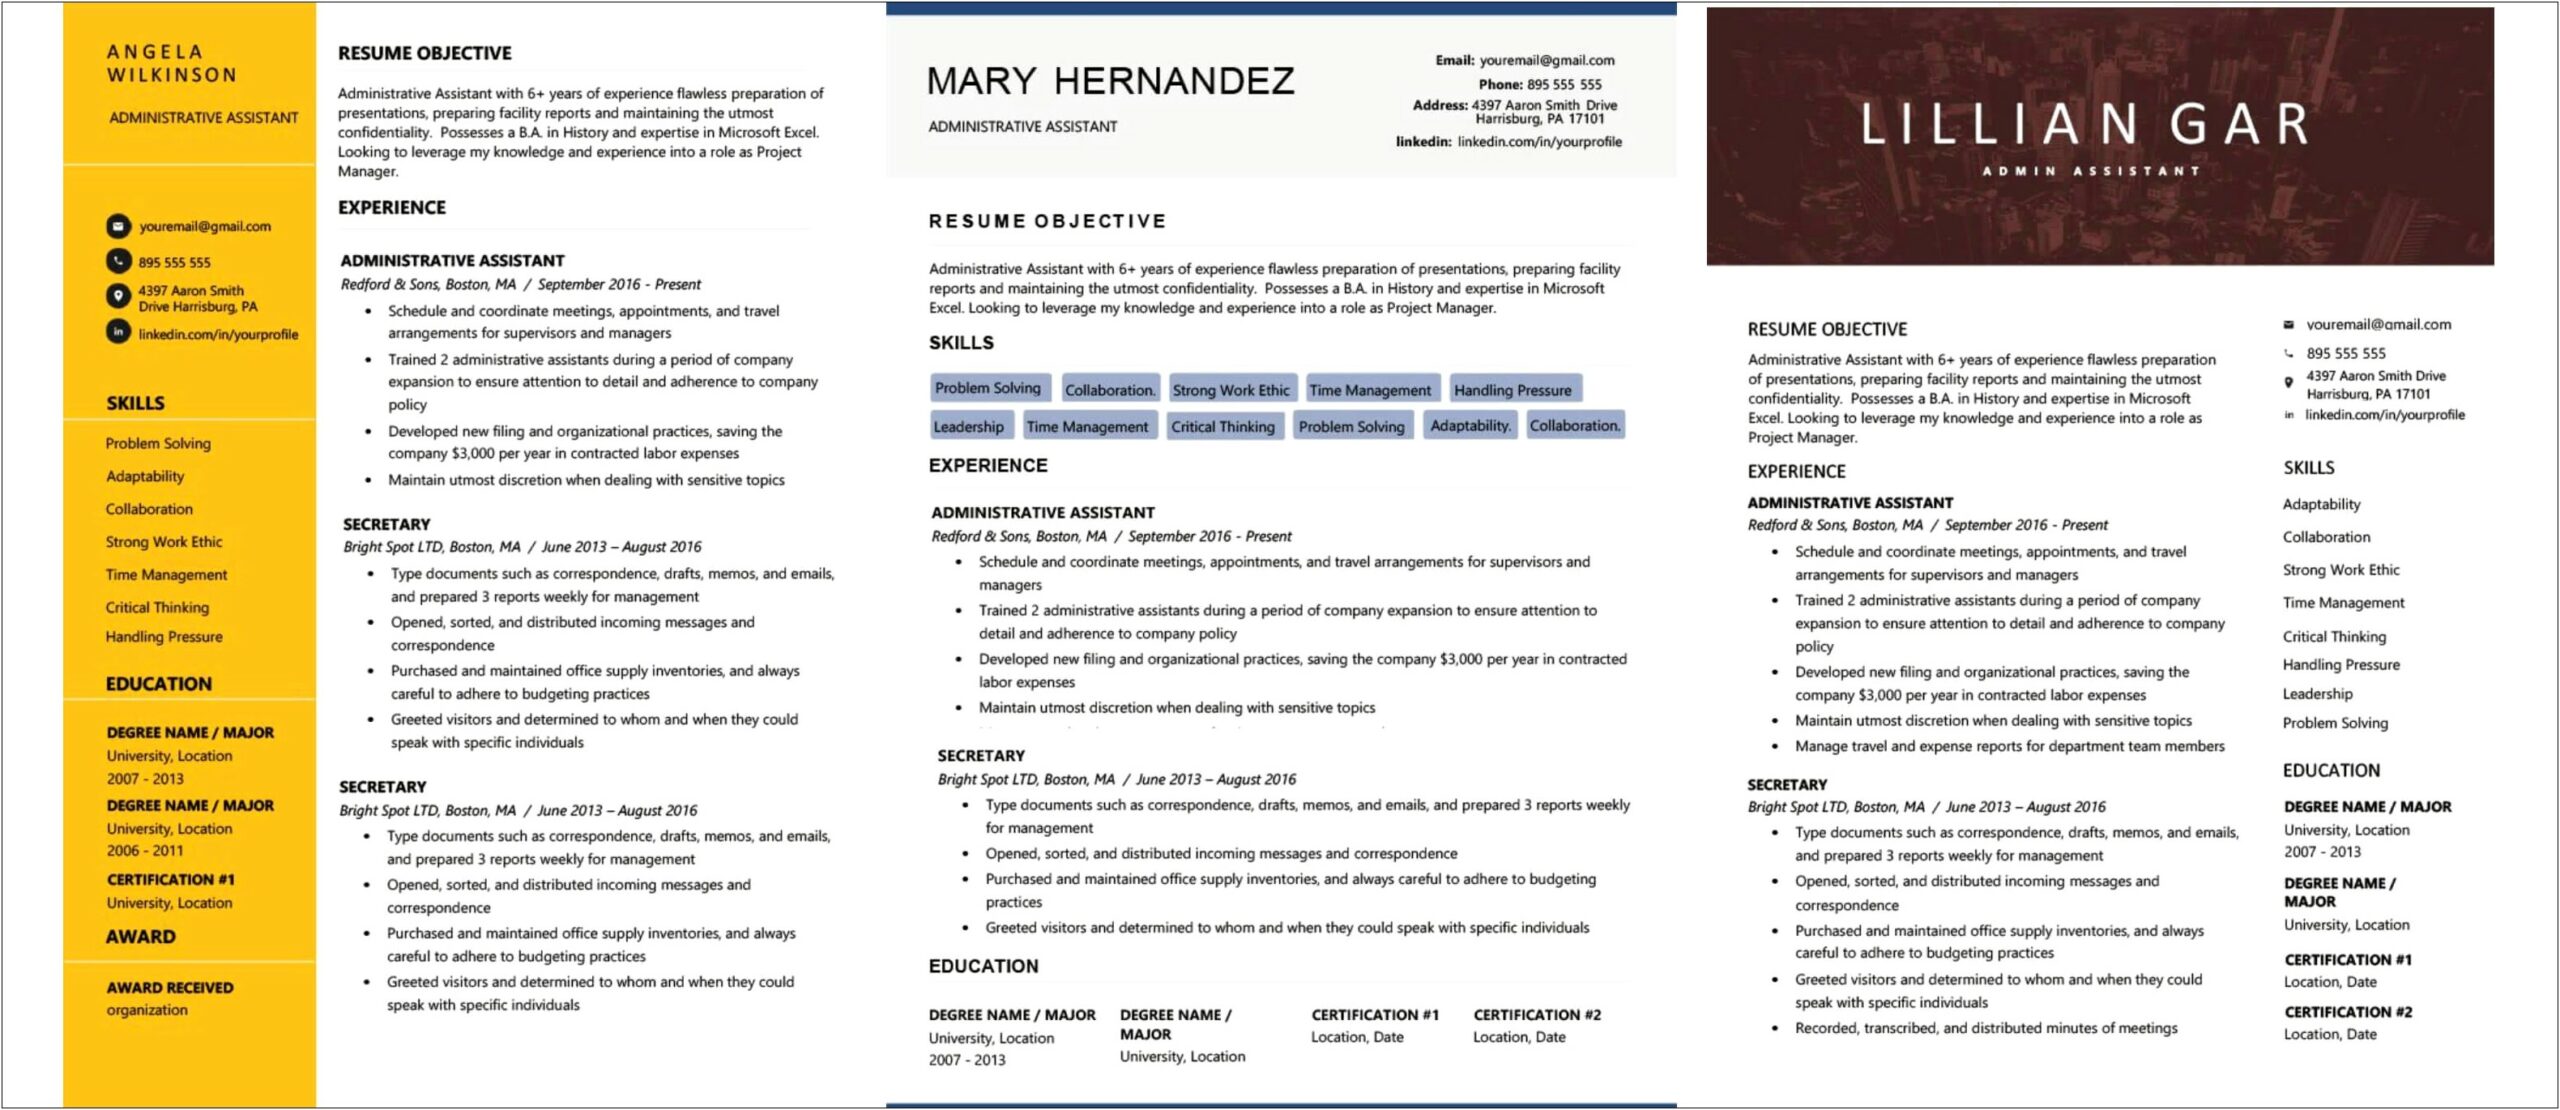 Resume School Only Attended One Year